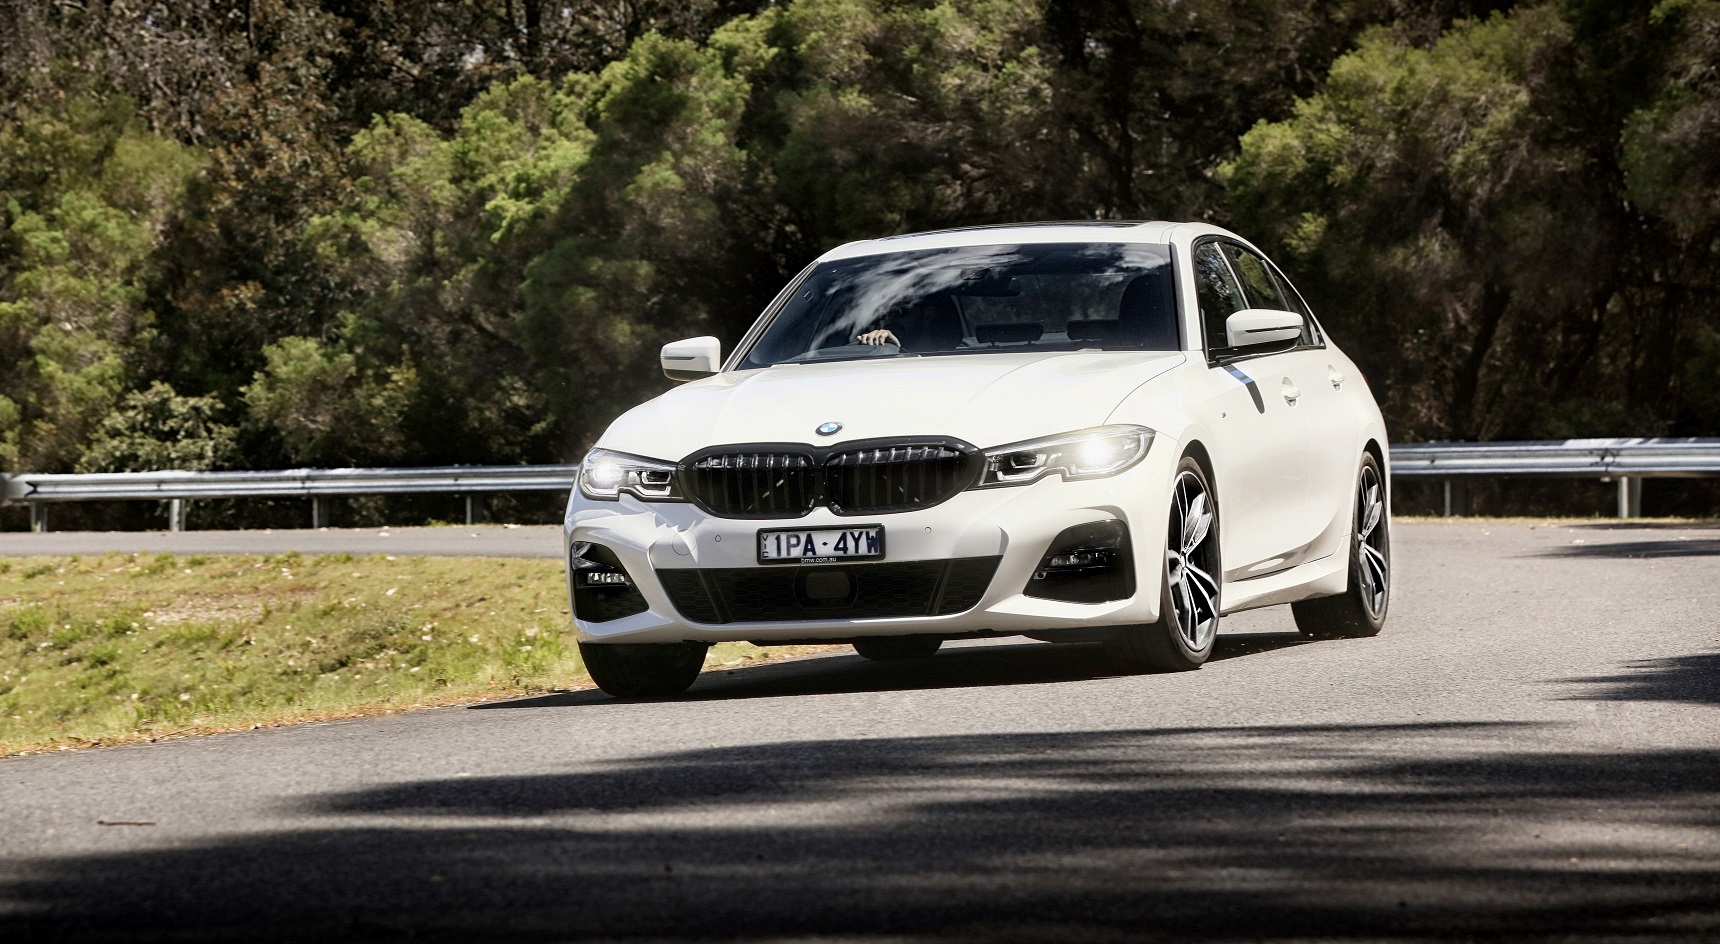 Aerodynamically, the 330i has been improved to cut through the air more efficiently.